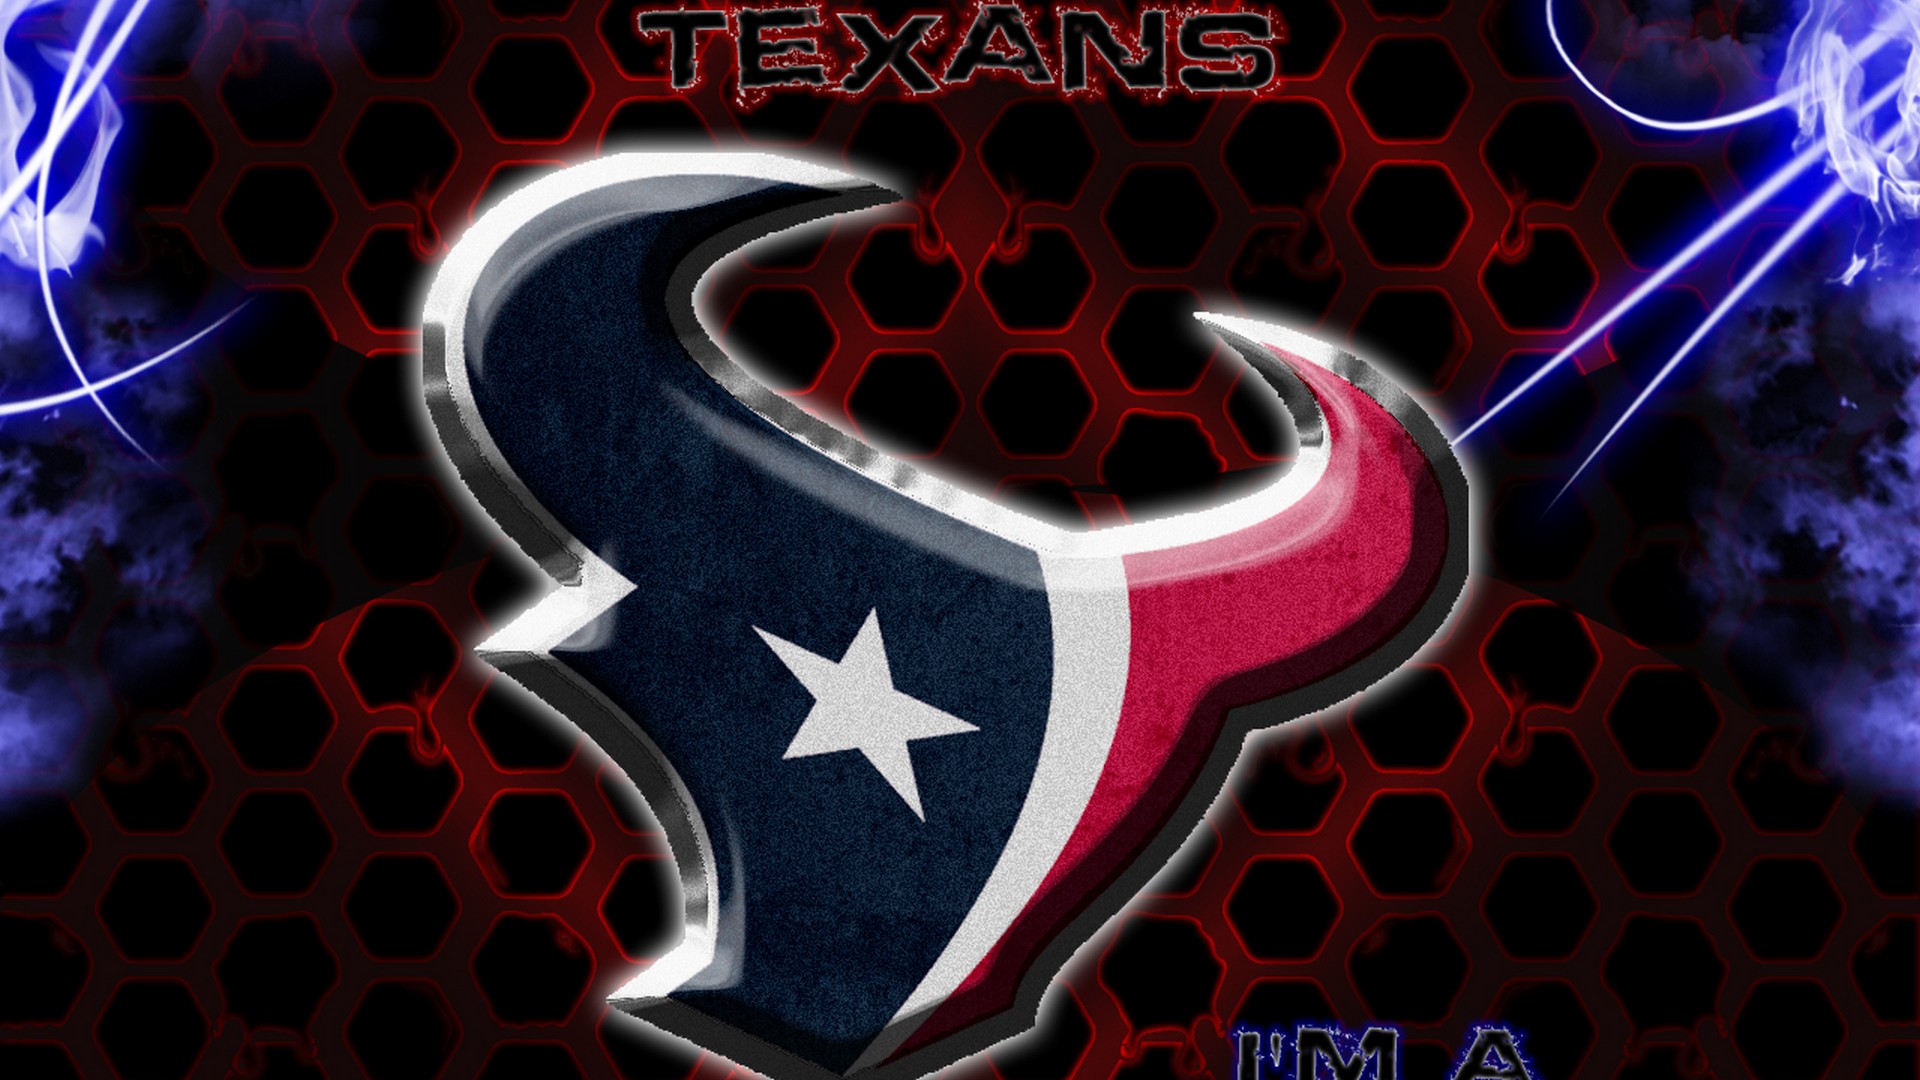 Houston Texans NFL Wallpaper For Mac Backgrounds with resolution 1920x1080 pixel. You can make this wallpaper for your Mac or Windows Desktop Background, iPhone, Android or Tablet and another Smartphone device